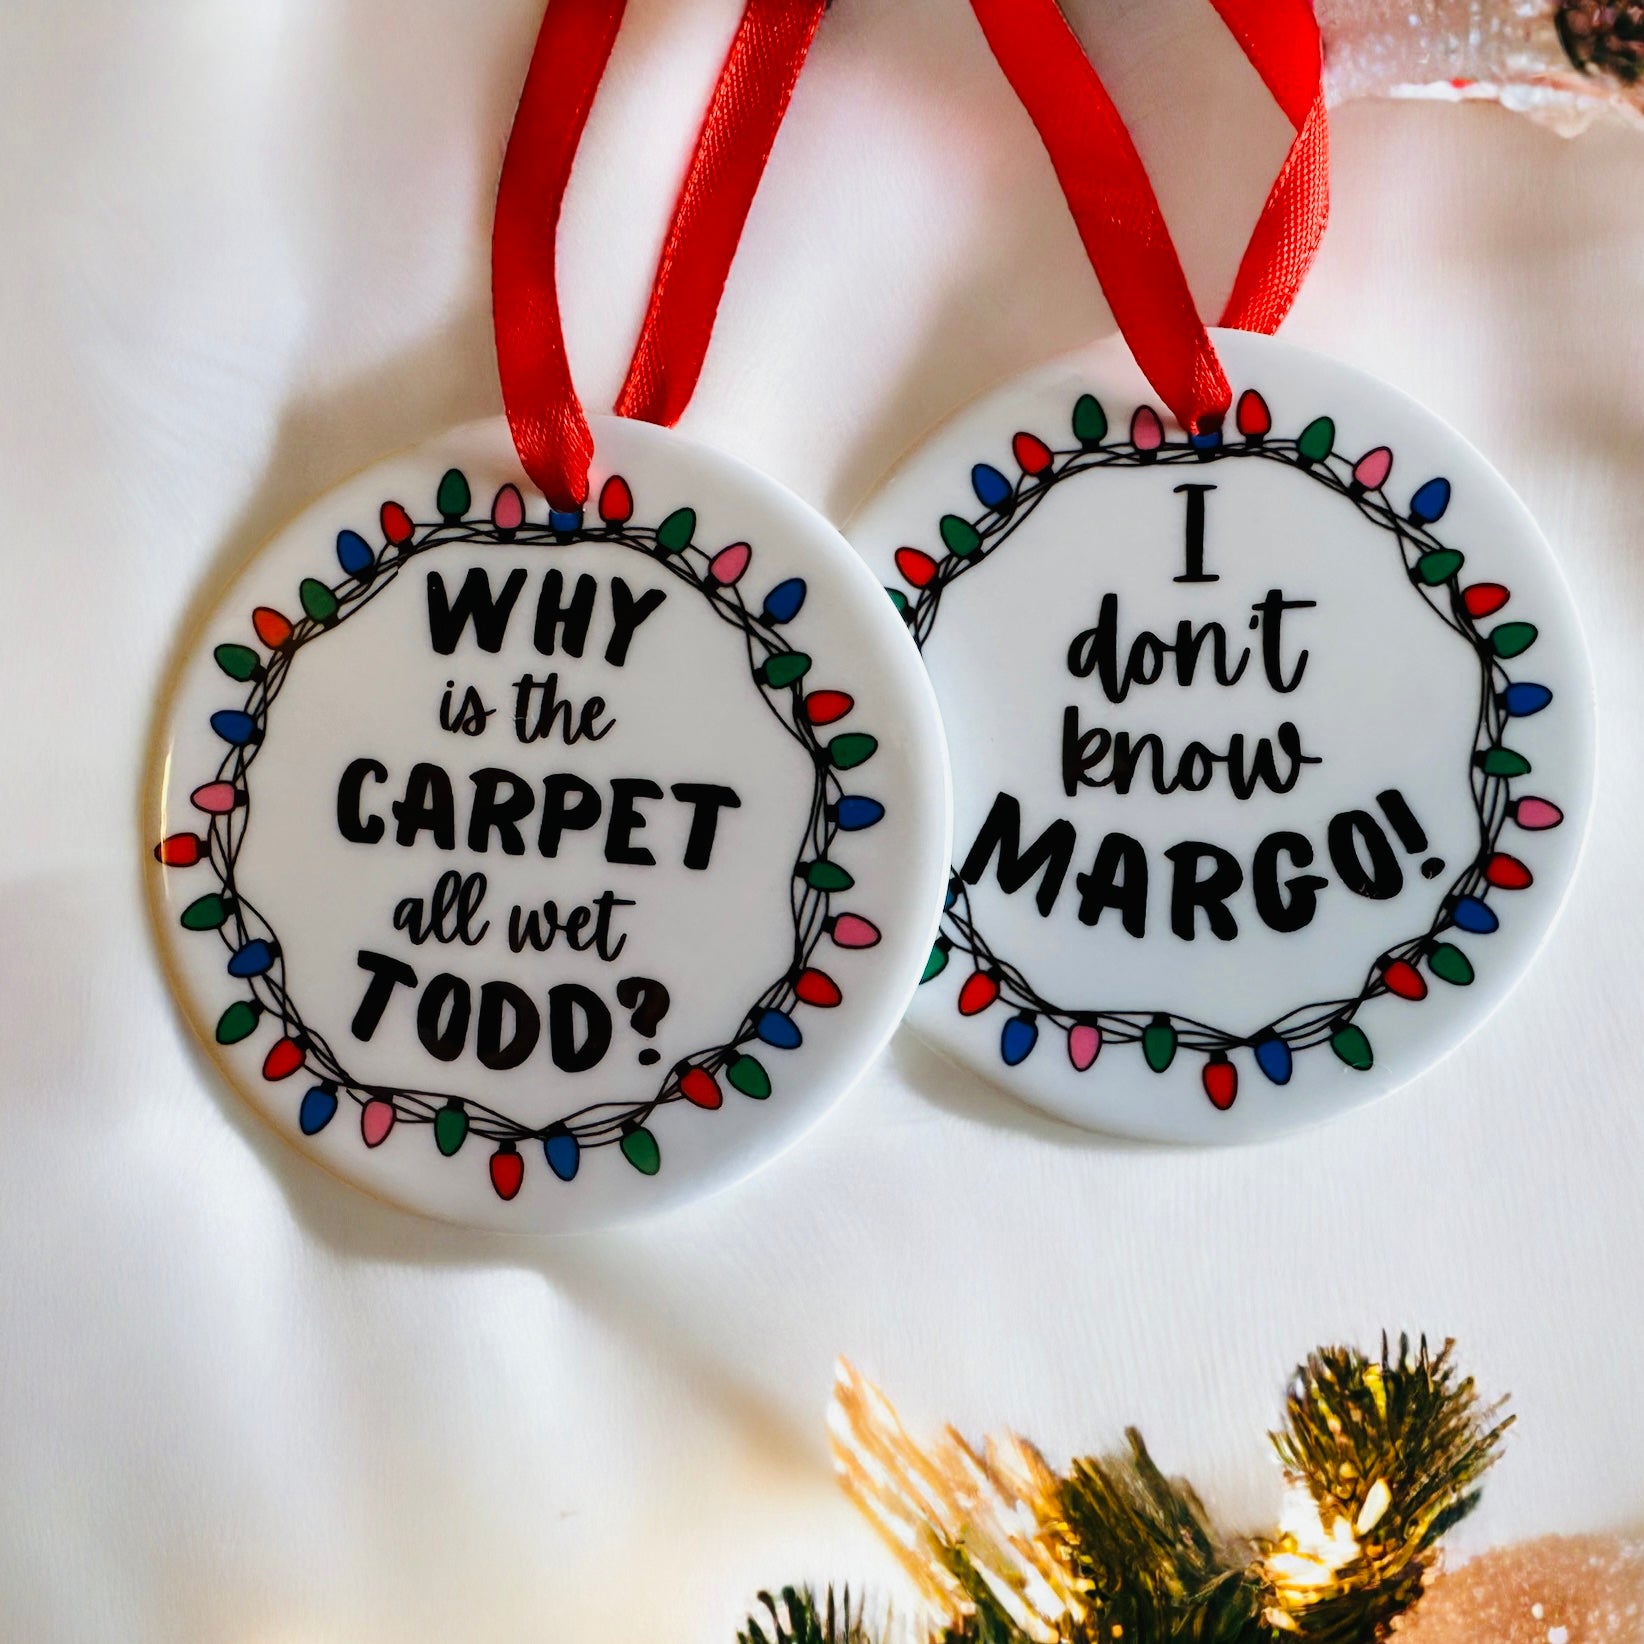 Ceramic Ornament with the saying "why is the carpet all wet todd, and the back says I dont know Margo, National Lampoons christmas vacation ornament